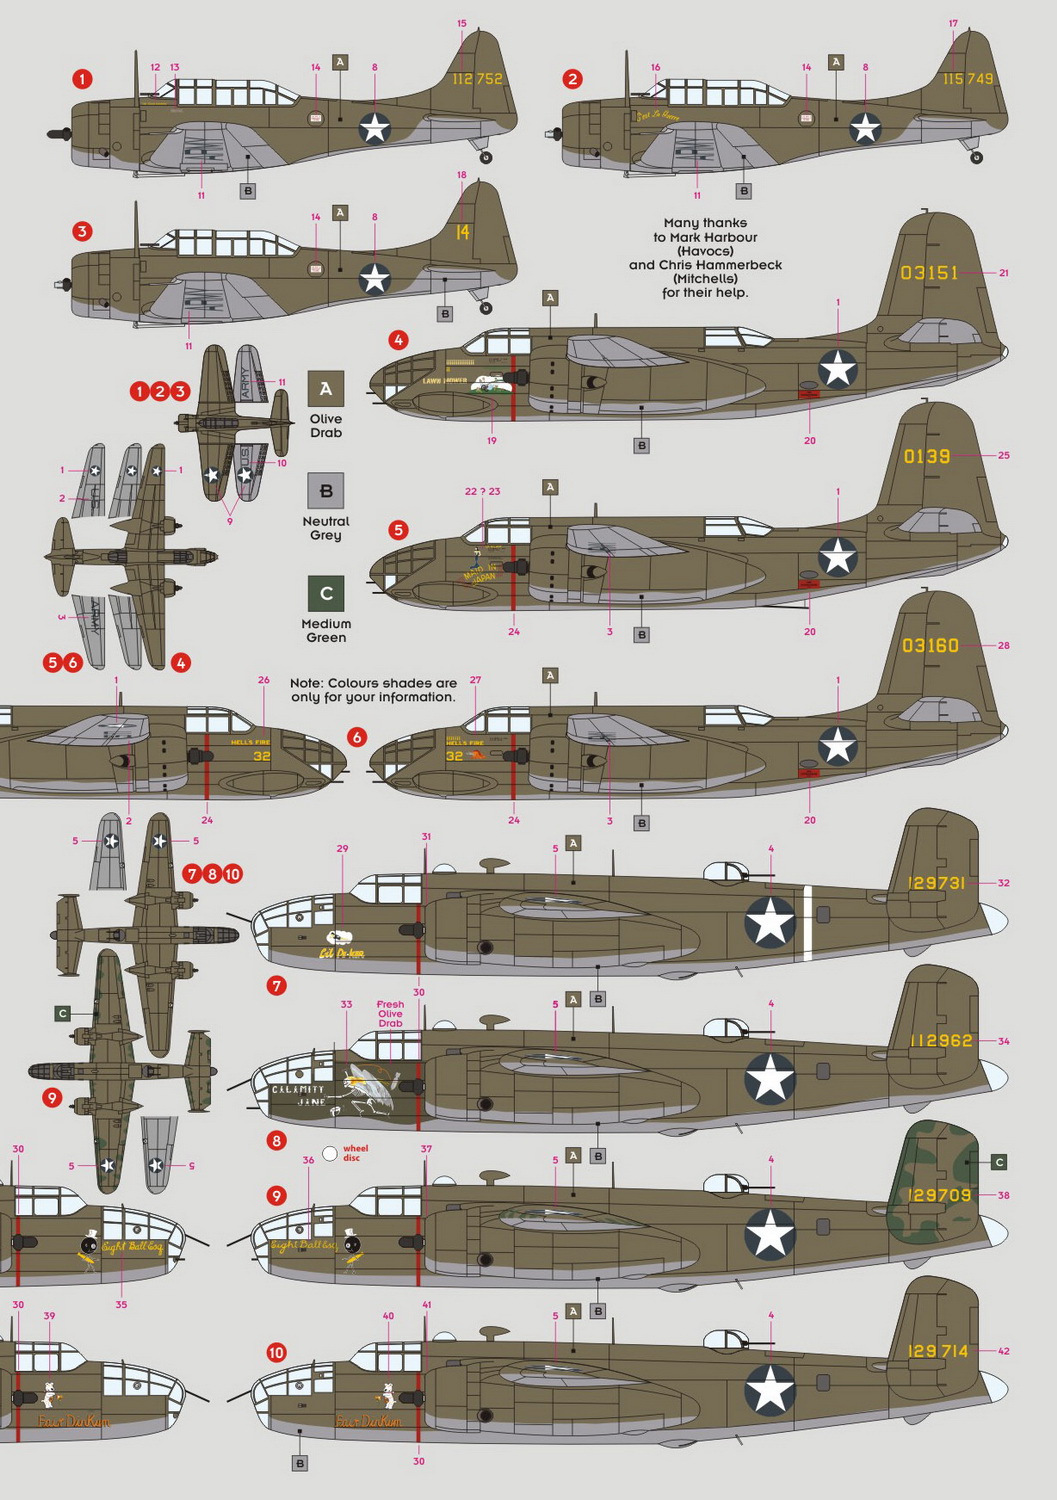 Decal 1/72 3rd Attack Group "The Grim Reapers" 1942 (DK Decals)